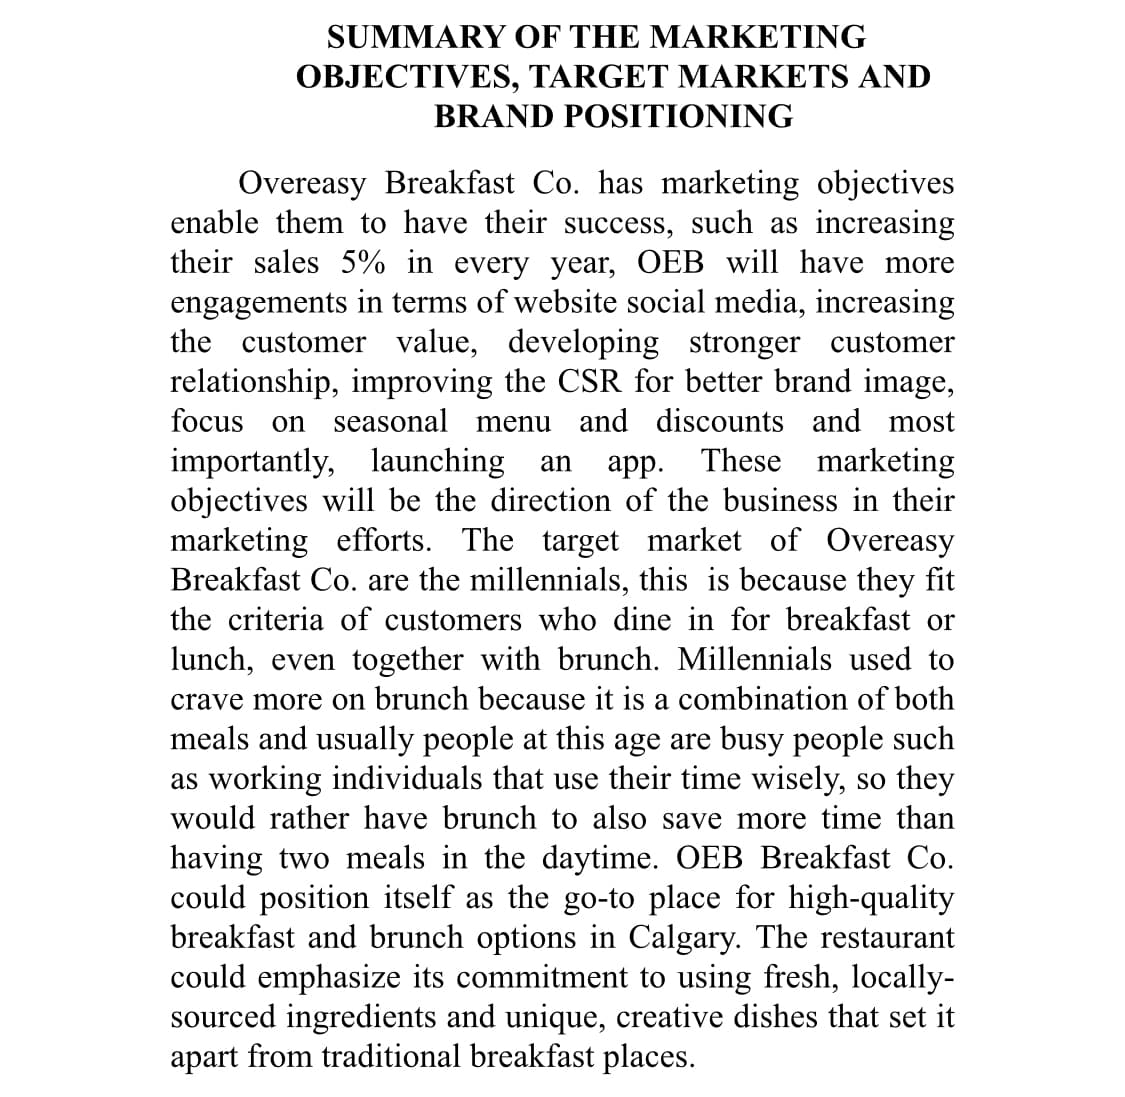 SUMMARY OF THE MARKETING
OBJECTIVES, TARGET MARKETS AND
BRAND POSITIONING
Overeasy Breakfast Co. has marketing objectives
enable them to have their success, such as increasing
their sales 5% in every year, OEB will have more
engagements in terms of website social media, increasing
the customer value, developing stronger customer
relationship, improving the CSR for better brand image,
focus on seasonal menu and discounts and most
importantly, launching an app. These marketing
objectives will be the direction of the business in their
marketing efforts. The target market of Overeasy
Breakfast Co. are the millennials, this is because they fit
the criteria of customers who dine in for breakfast or
lunch, even together with brunch. Millennials used to
crave more on brunch because it is a combination of both
meals and usually people at this age are busy people such
as working individuals that use their time wisely, so they
would rather have brunch to also save more time than
having two meals in the daytime. OEB Breakfast Co.
could position itself as the go-to place for high-quality
breakfast and brunch options in Calgary. The restaurant
could emphasize its commitment to using fresh, locally-
sourced ingredients and unique, creative dishes that set it
apart from traditional breakfast places.